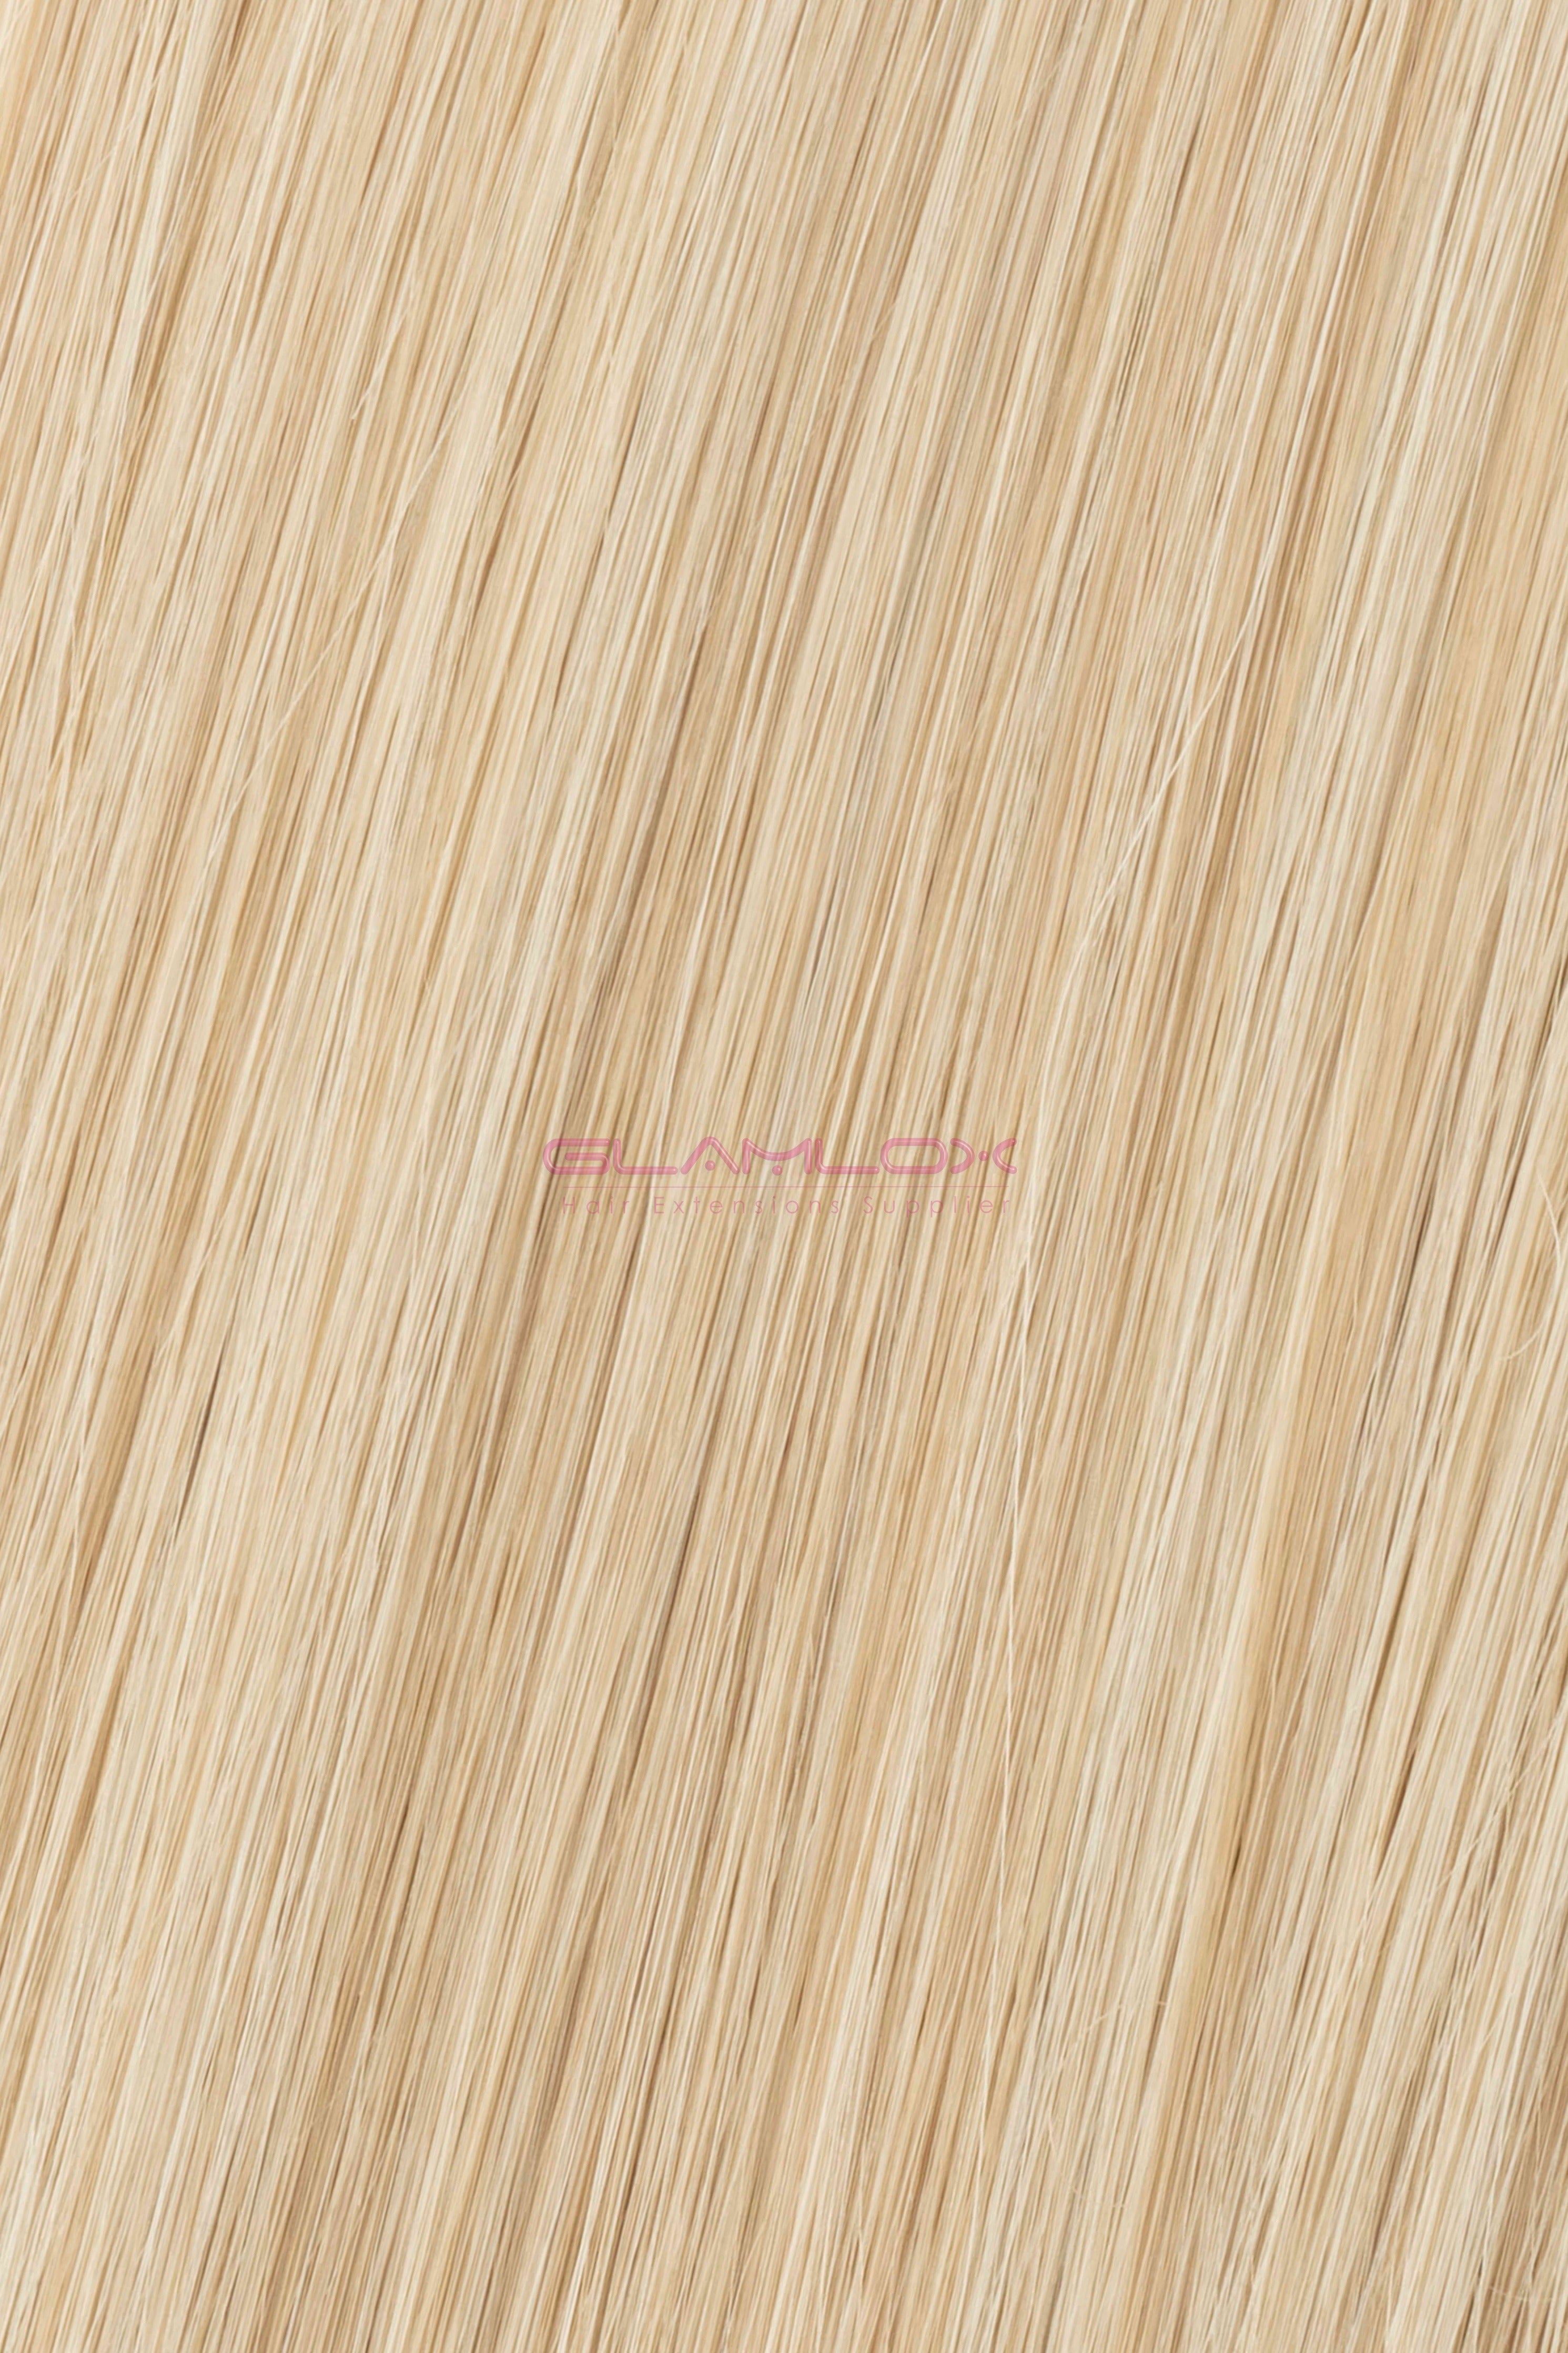 18" Half Weft Hair Extensions - Russian Mongolian Double Drawn Remy Human Hair